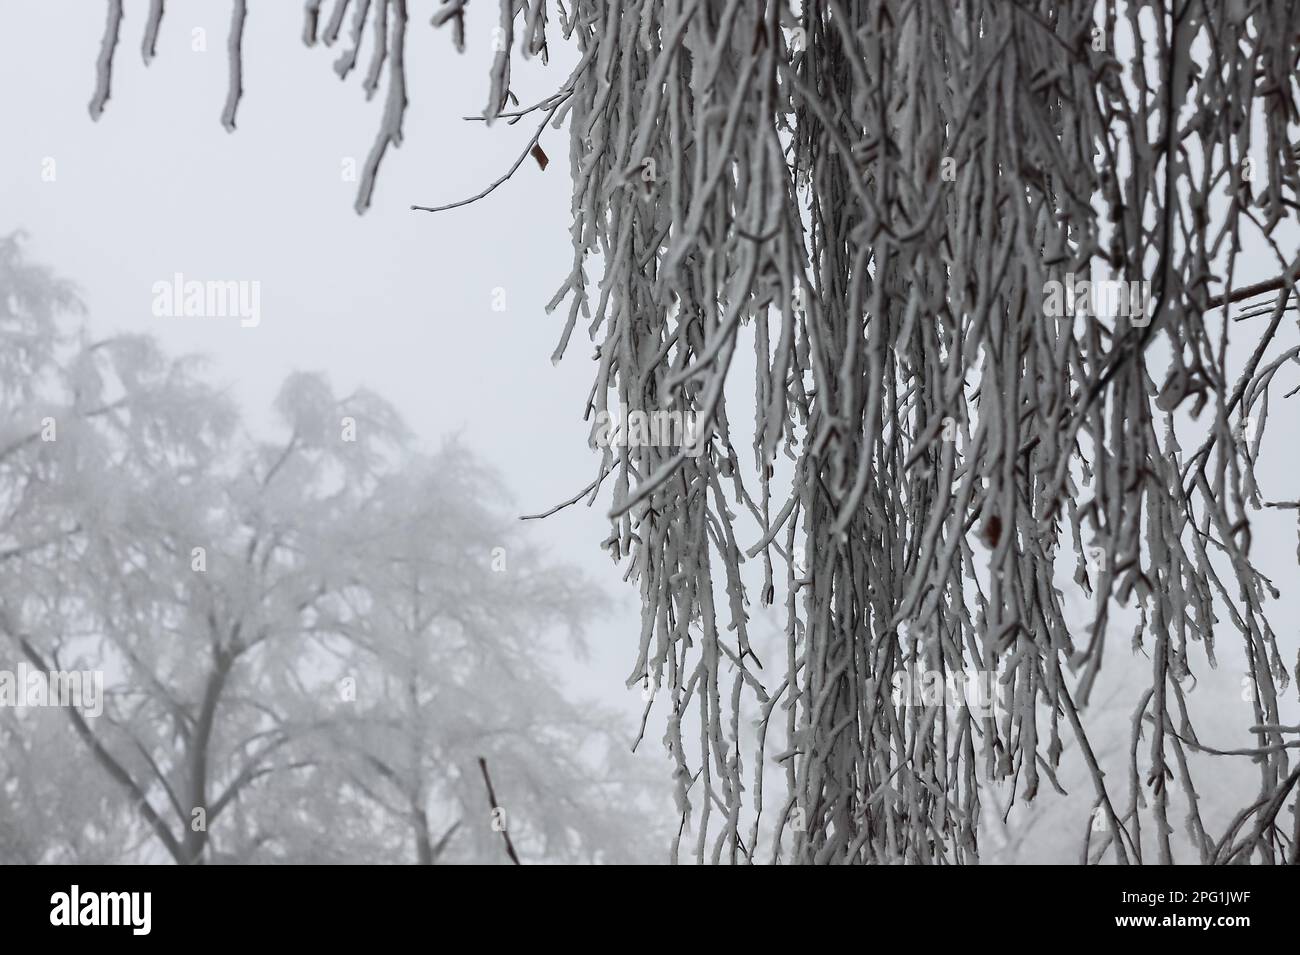 Branches Covered With Ice After Freezing Rain Sparkling Ice Covered  Everything After Ice Storm Cyclone Terrible Beauty Of Nature Concept Winter  Landscape Scene Postcard Selective Focus Stock Photo - Download Image Now 